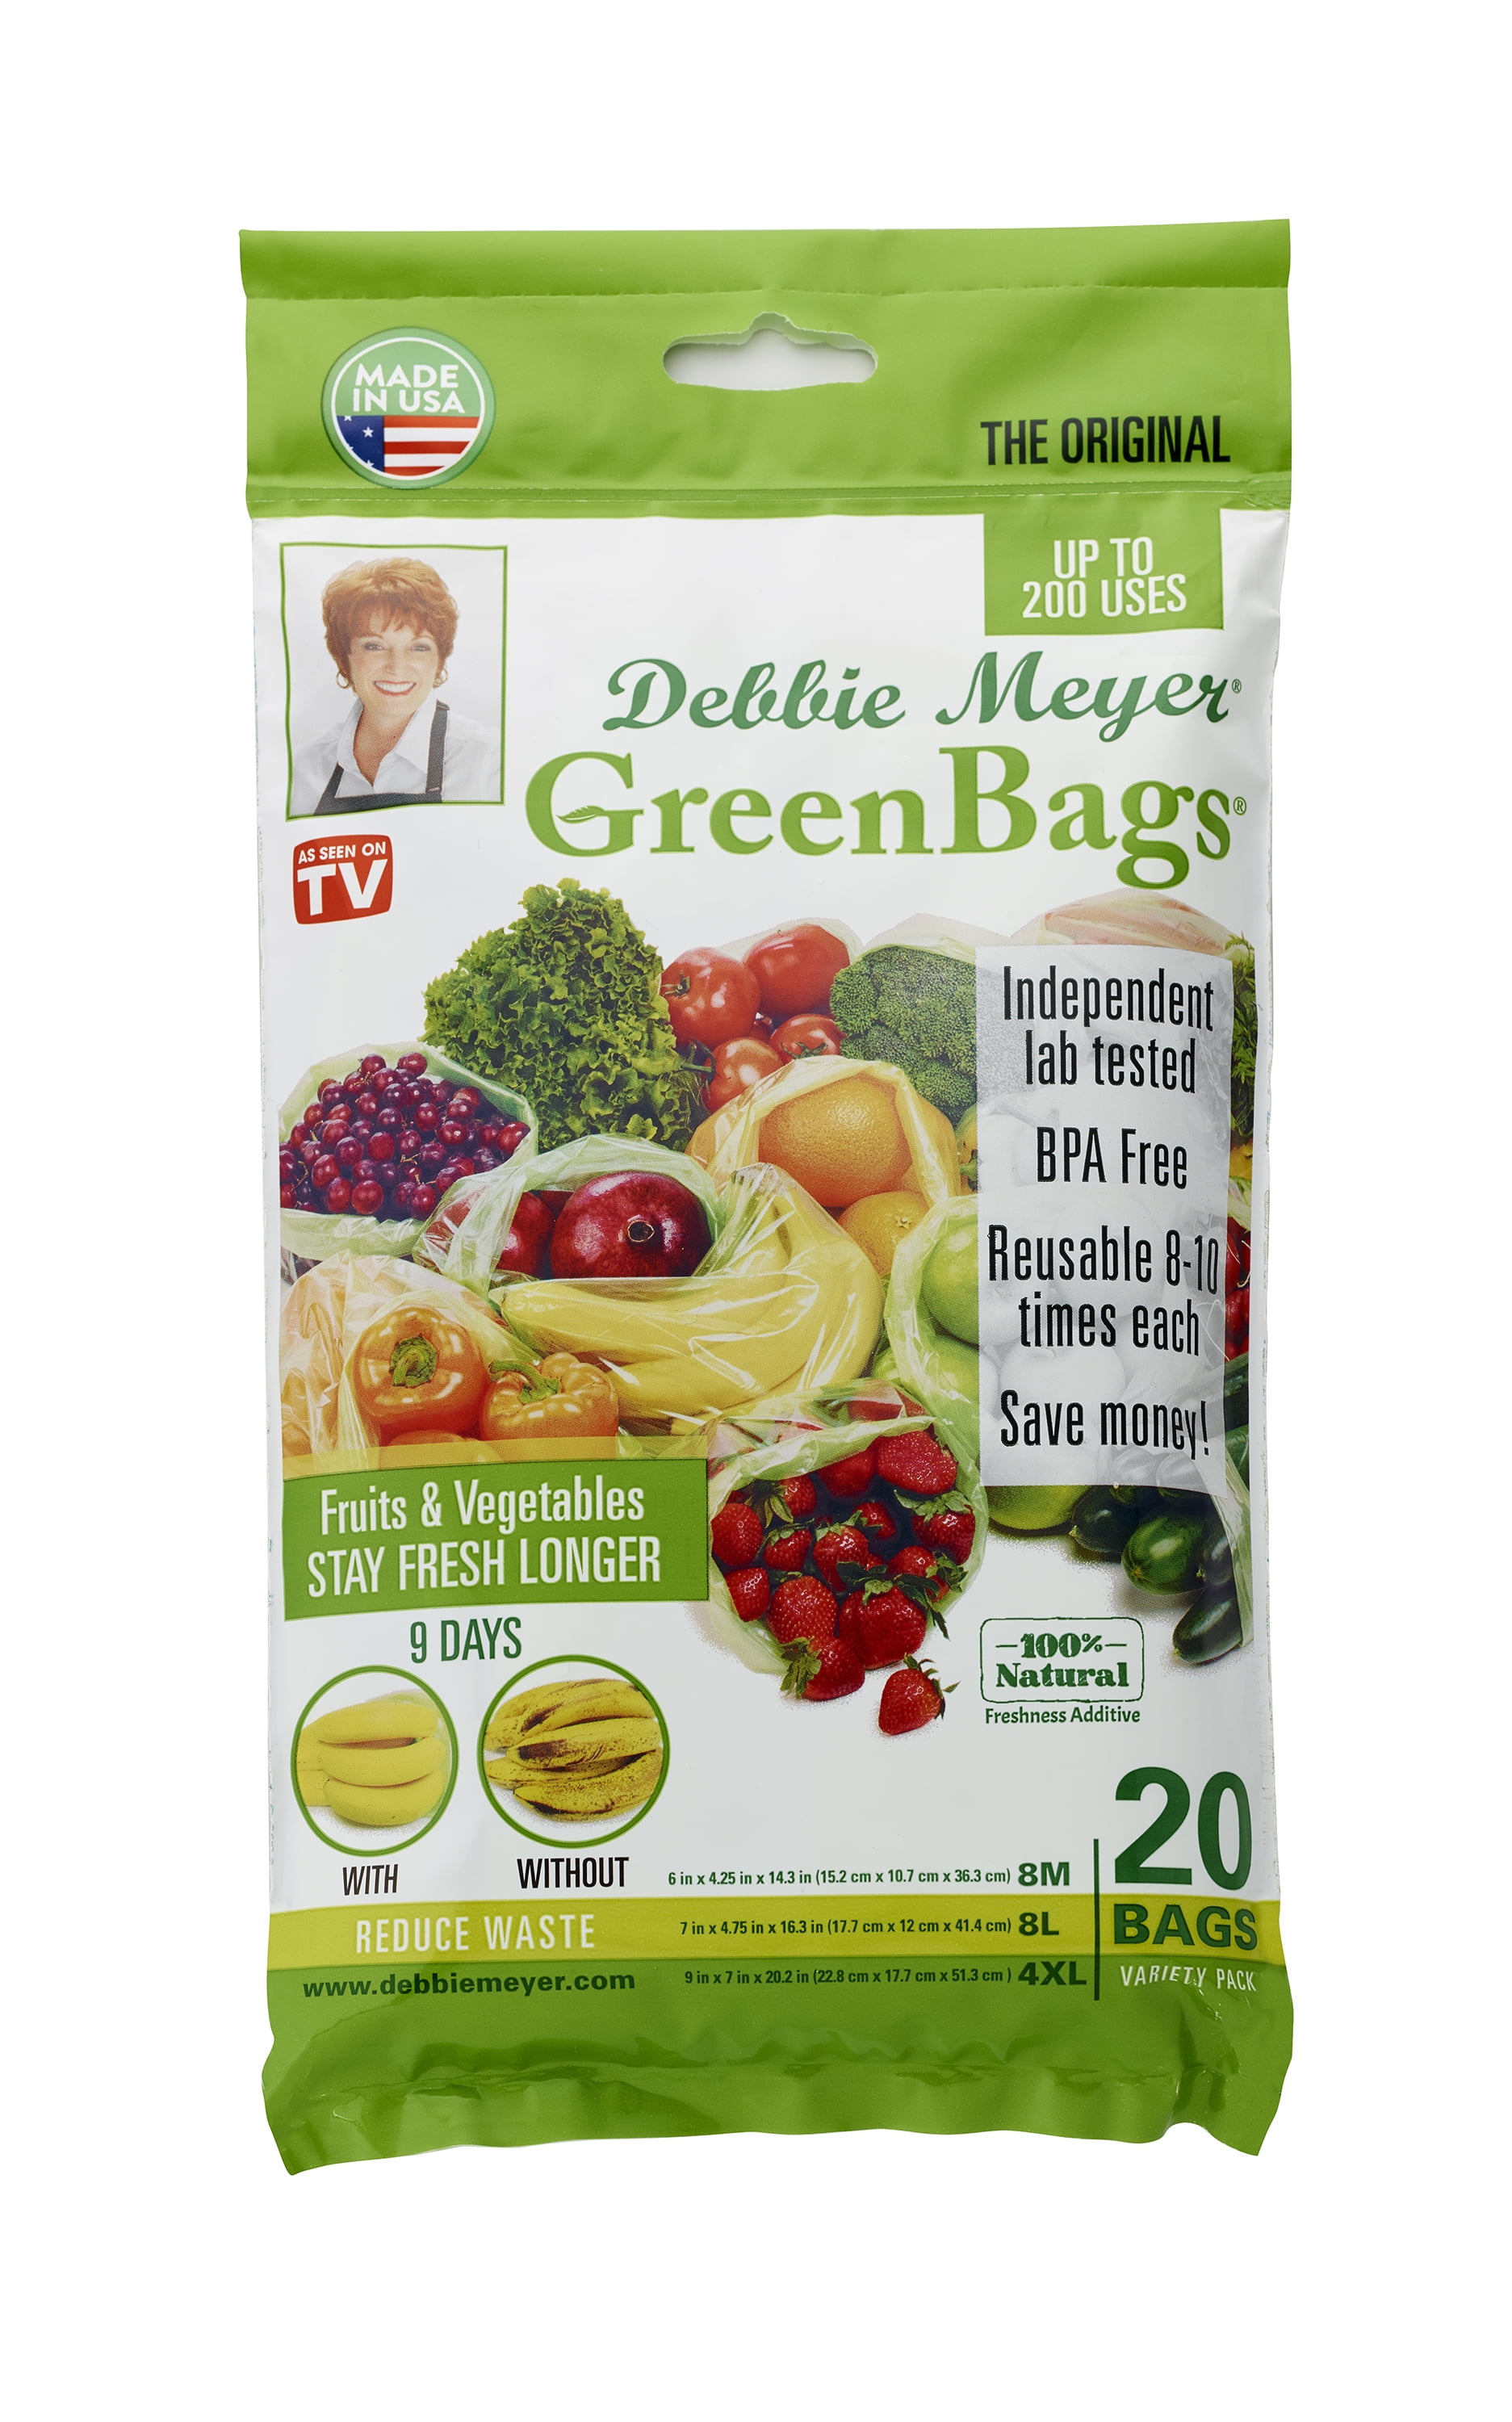 Debbie Meyer Green Boxes Storage Sets - Choose From 15 or 19 piece - KEEPS  FOOD FRESH! - THAT Daily Deal